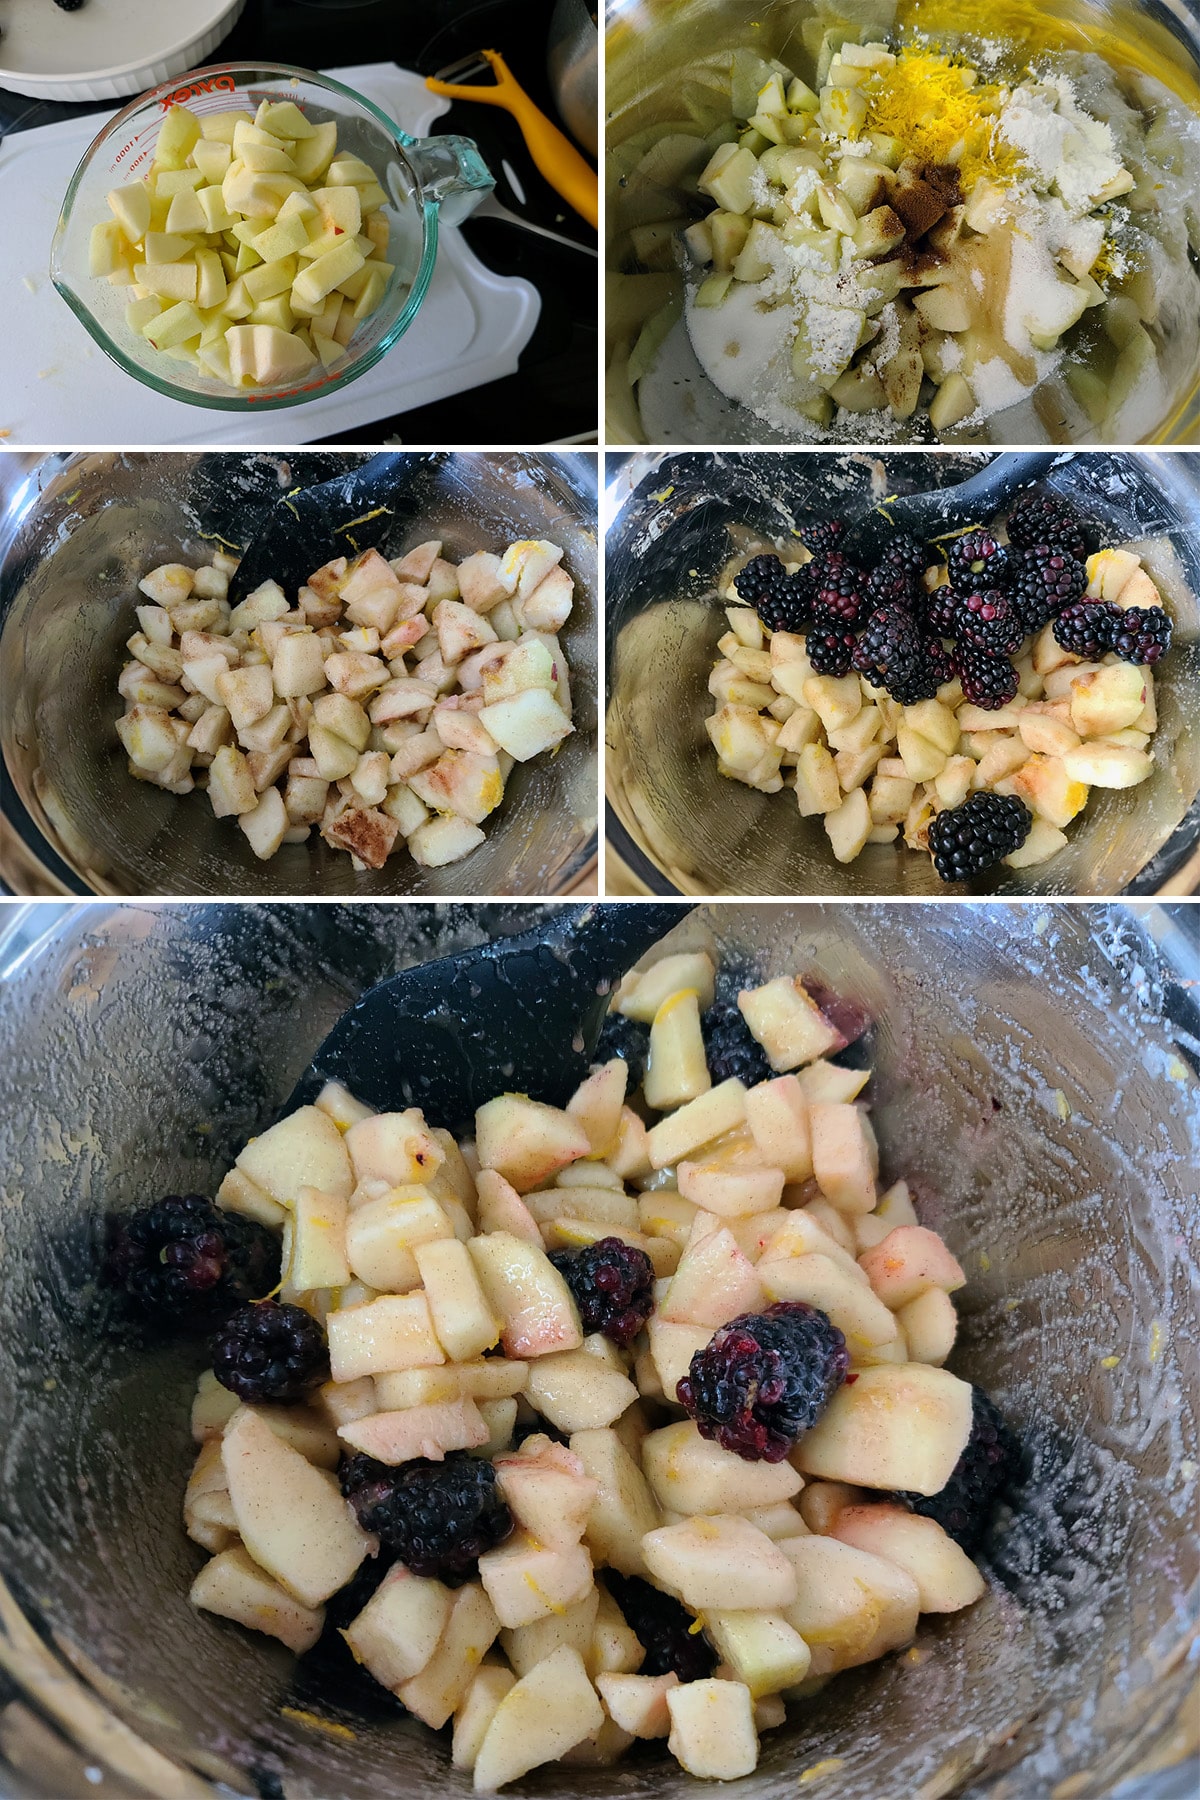 A 5 part image showing the apple and blackberry filling being mixed together.